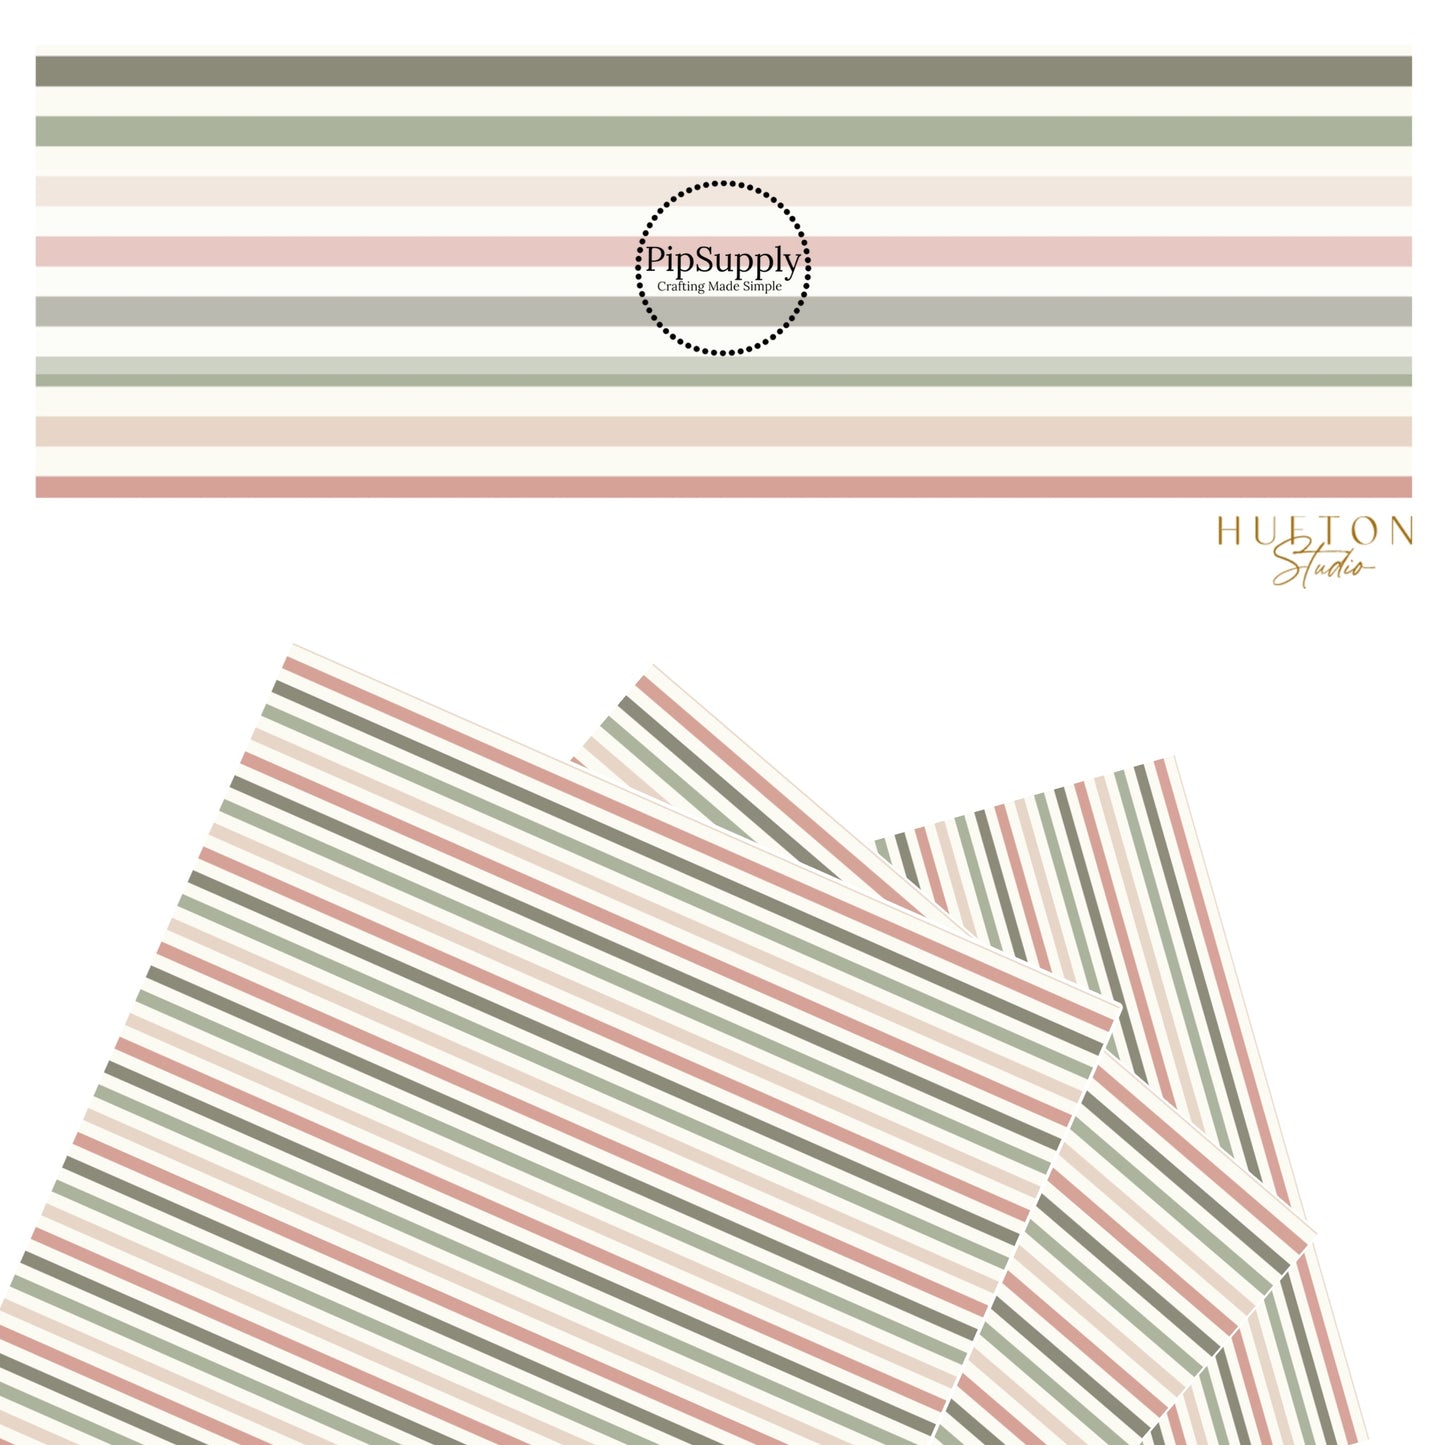 These stripe pattern themed faux leather sheets contain the following design elements: dusty rose, light pink, tan, and taupe stripes on white. Our CPSIA compliant faux leather sheets or rolls can be used for all types of crafting projects.